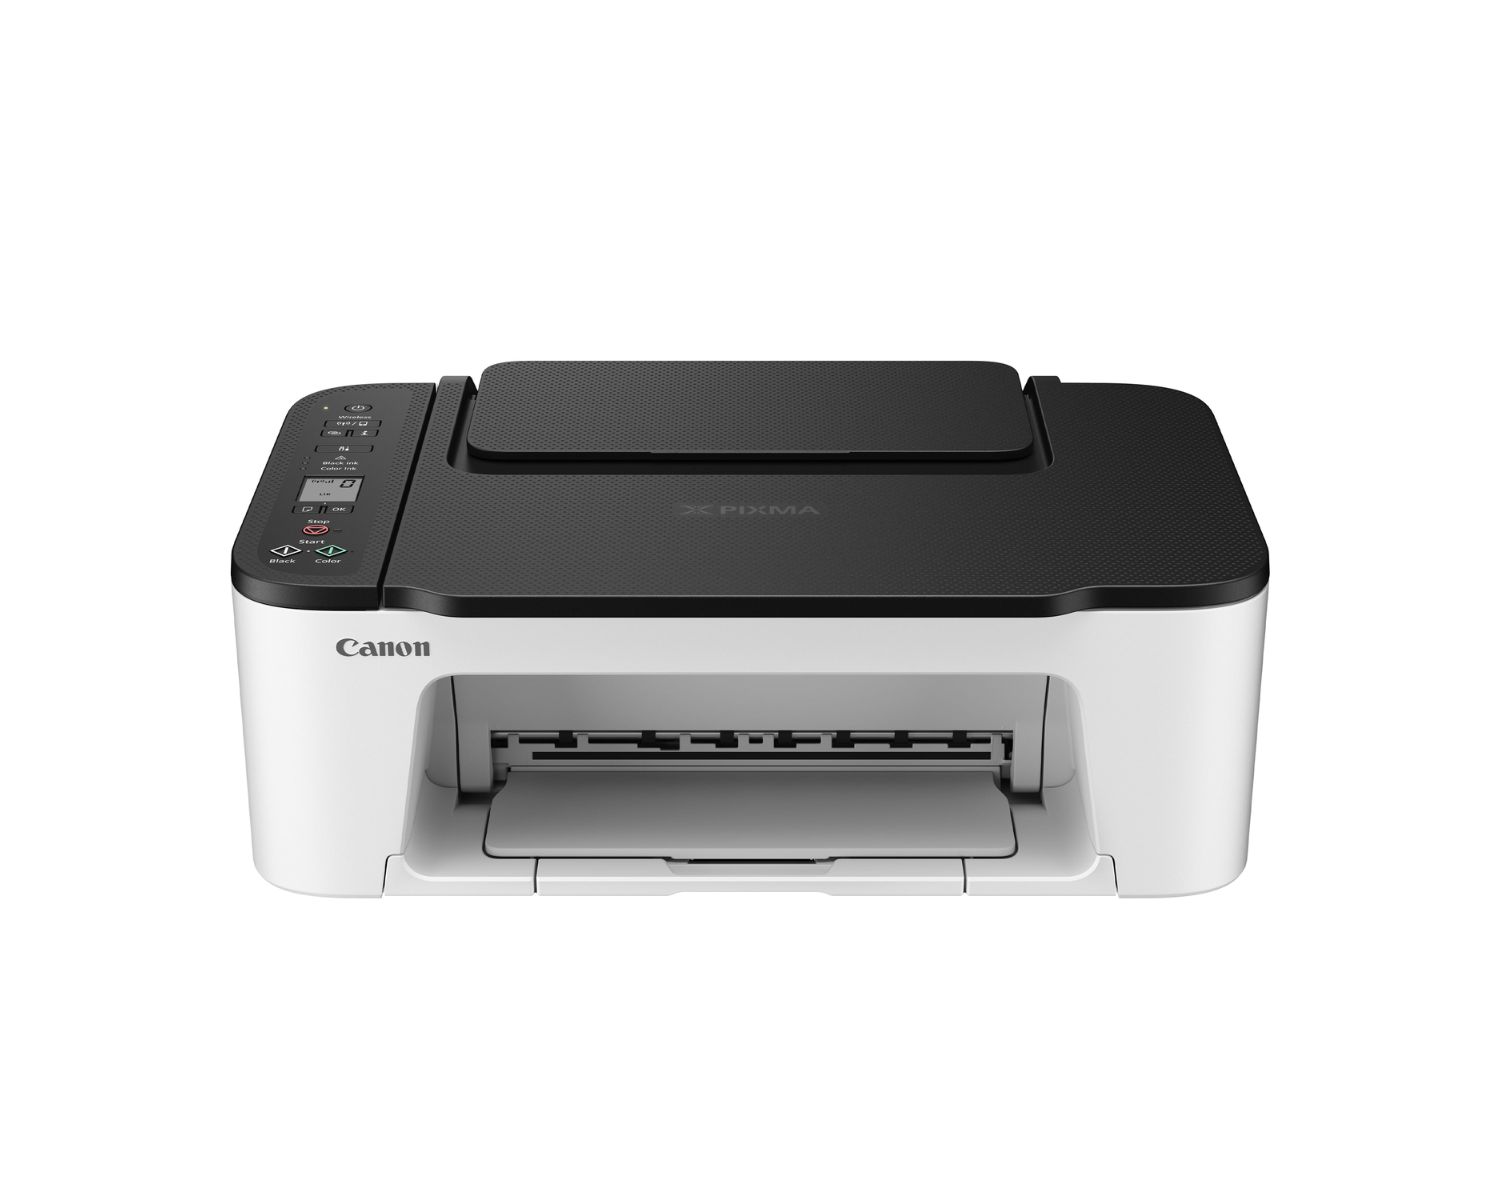 How To Connect TS3522 Canon Printer To Wi-Fi